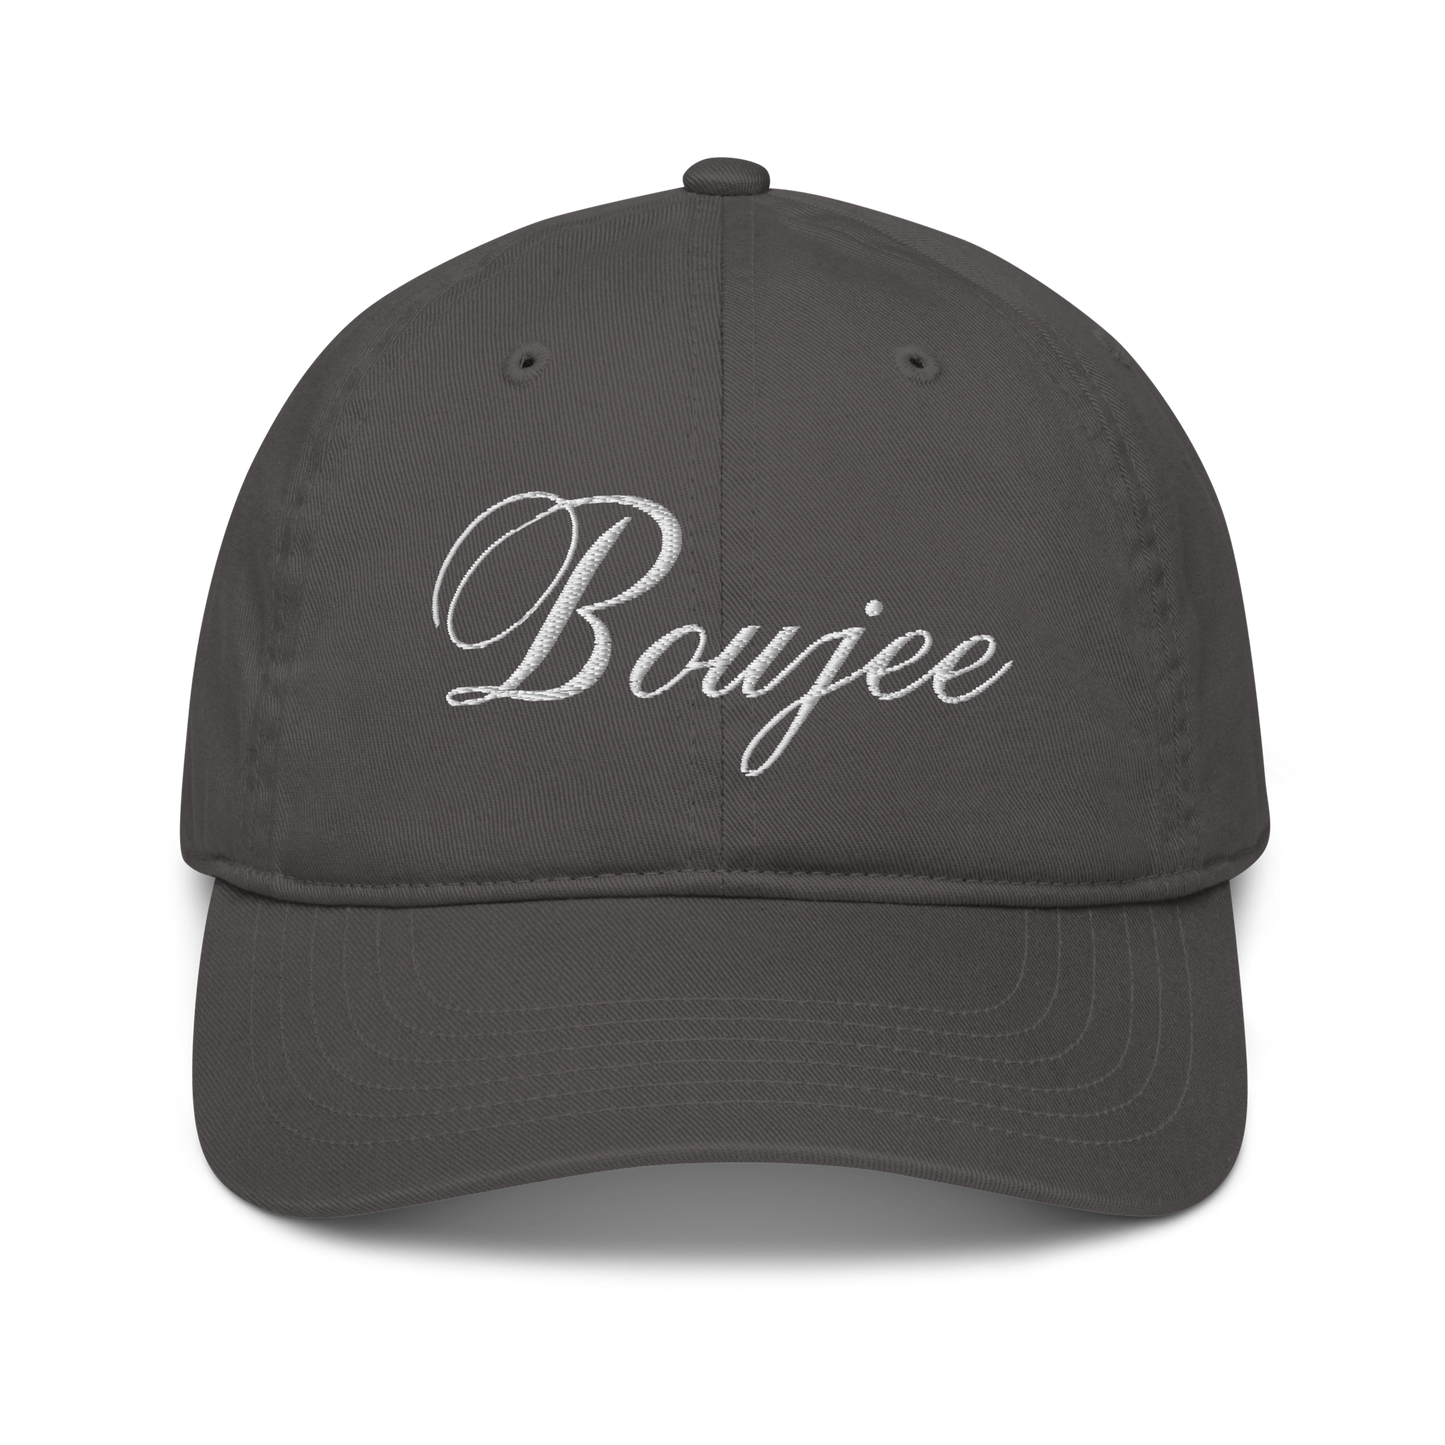 Discover the exquisite Boujee, the organic hat that exudes opulence and sophistication. Color: Gray